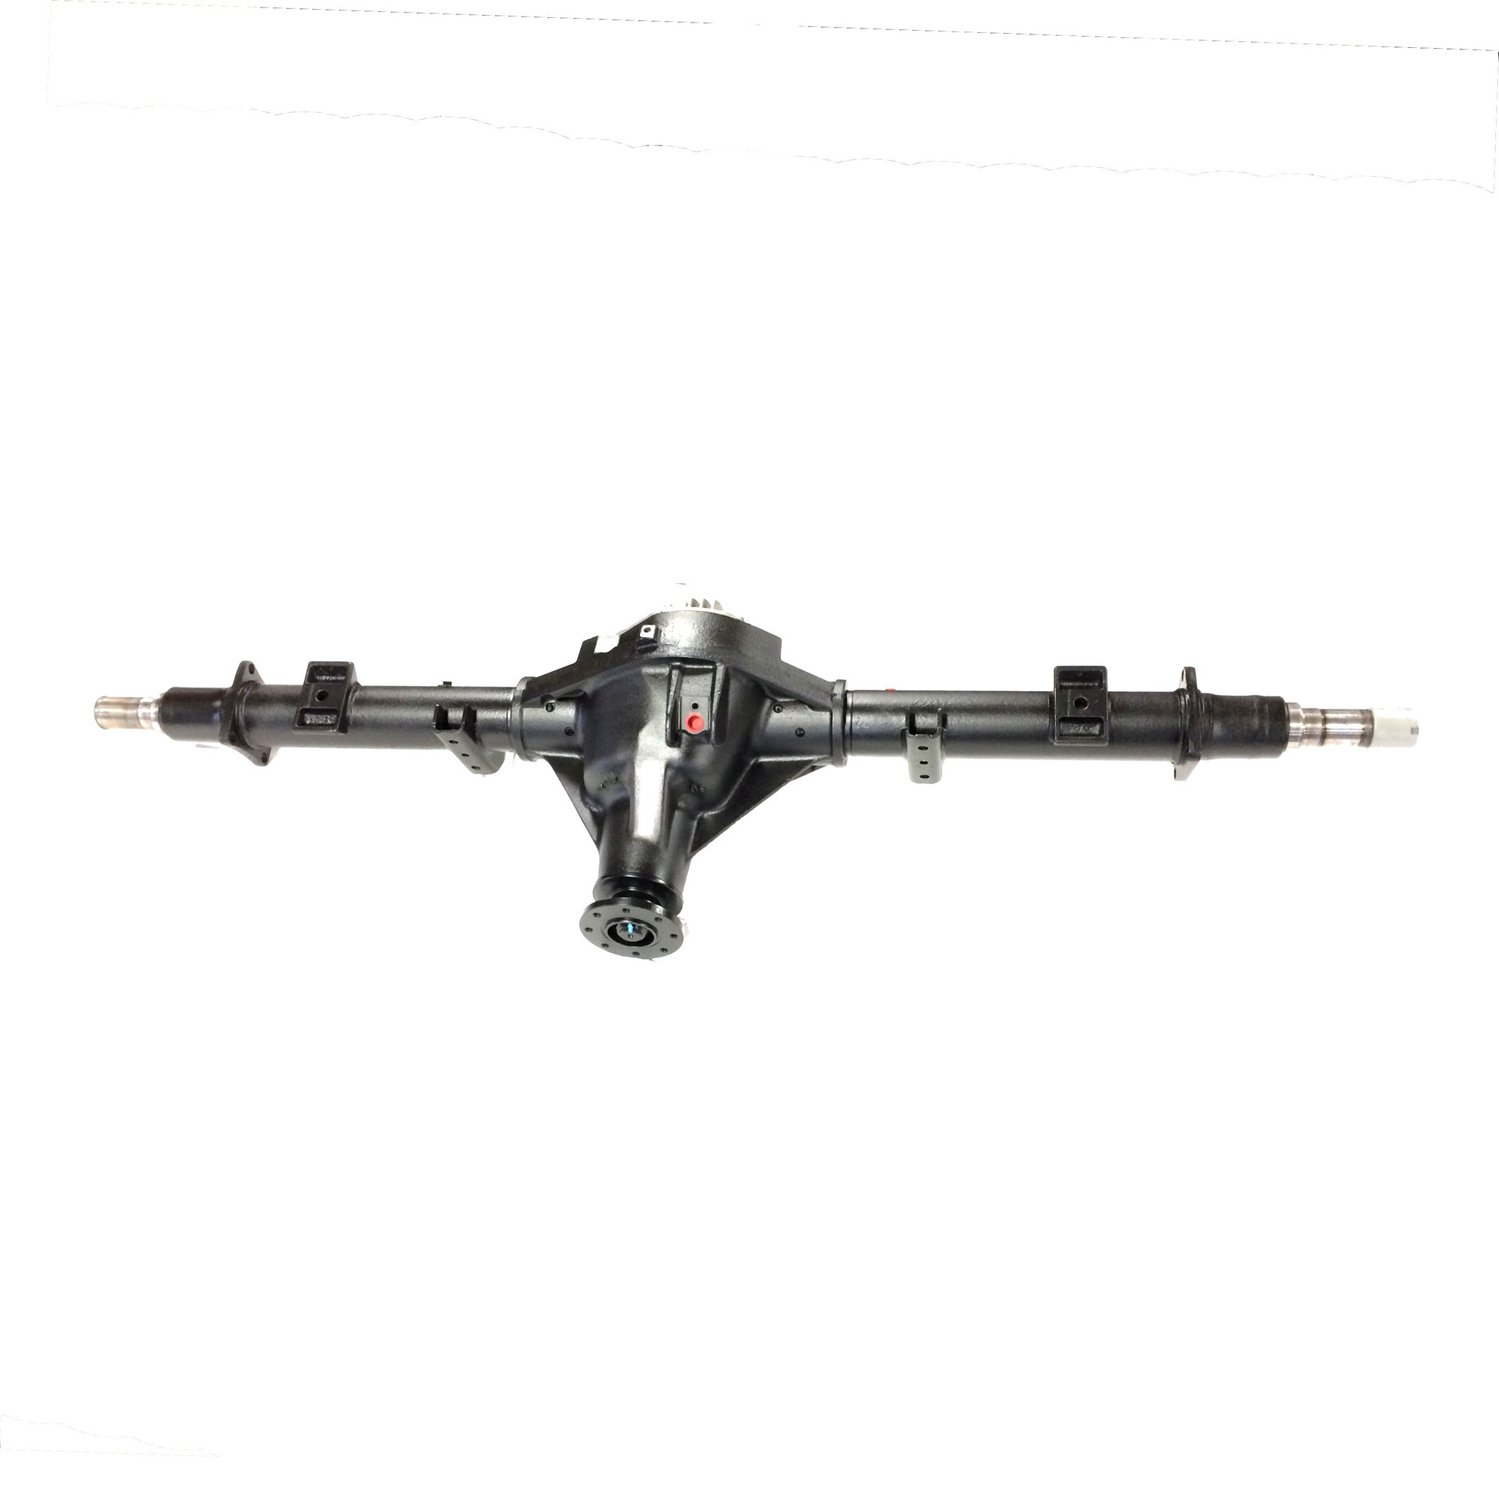 Remanufactured Complete Axle Assy for Dana 80 08-10 F350 4.30, DRW, Cab Chassis, Posi LSD